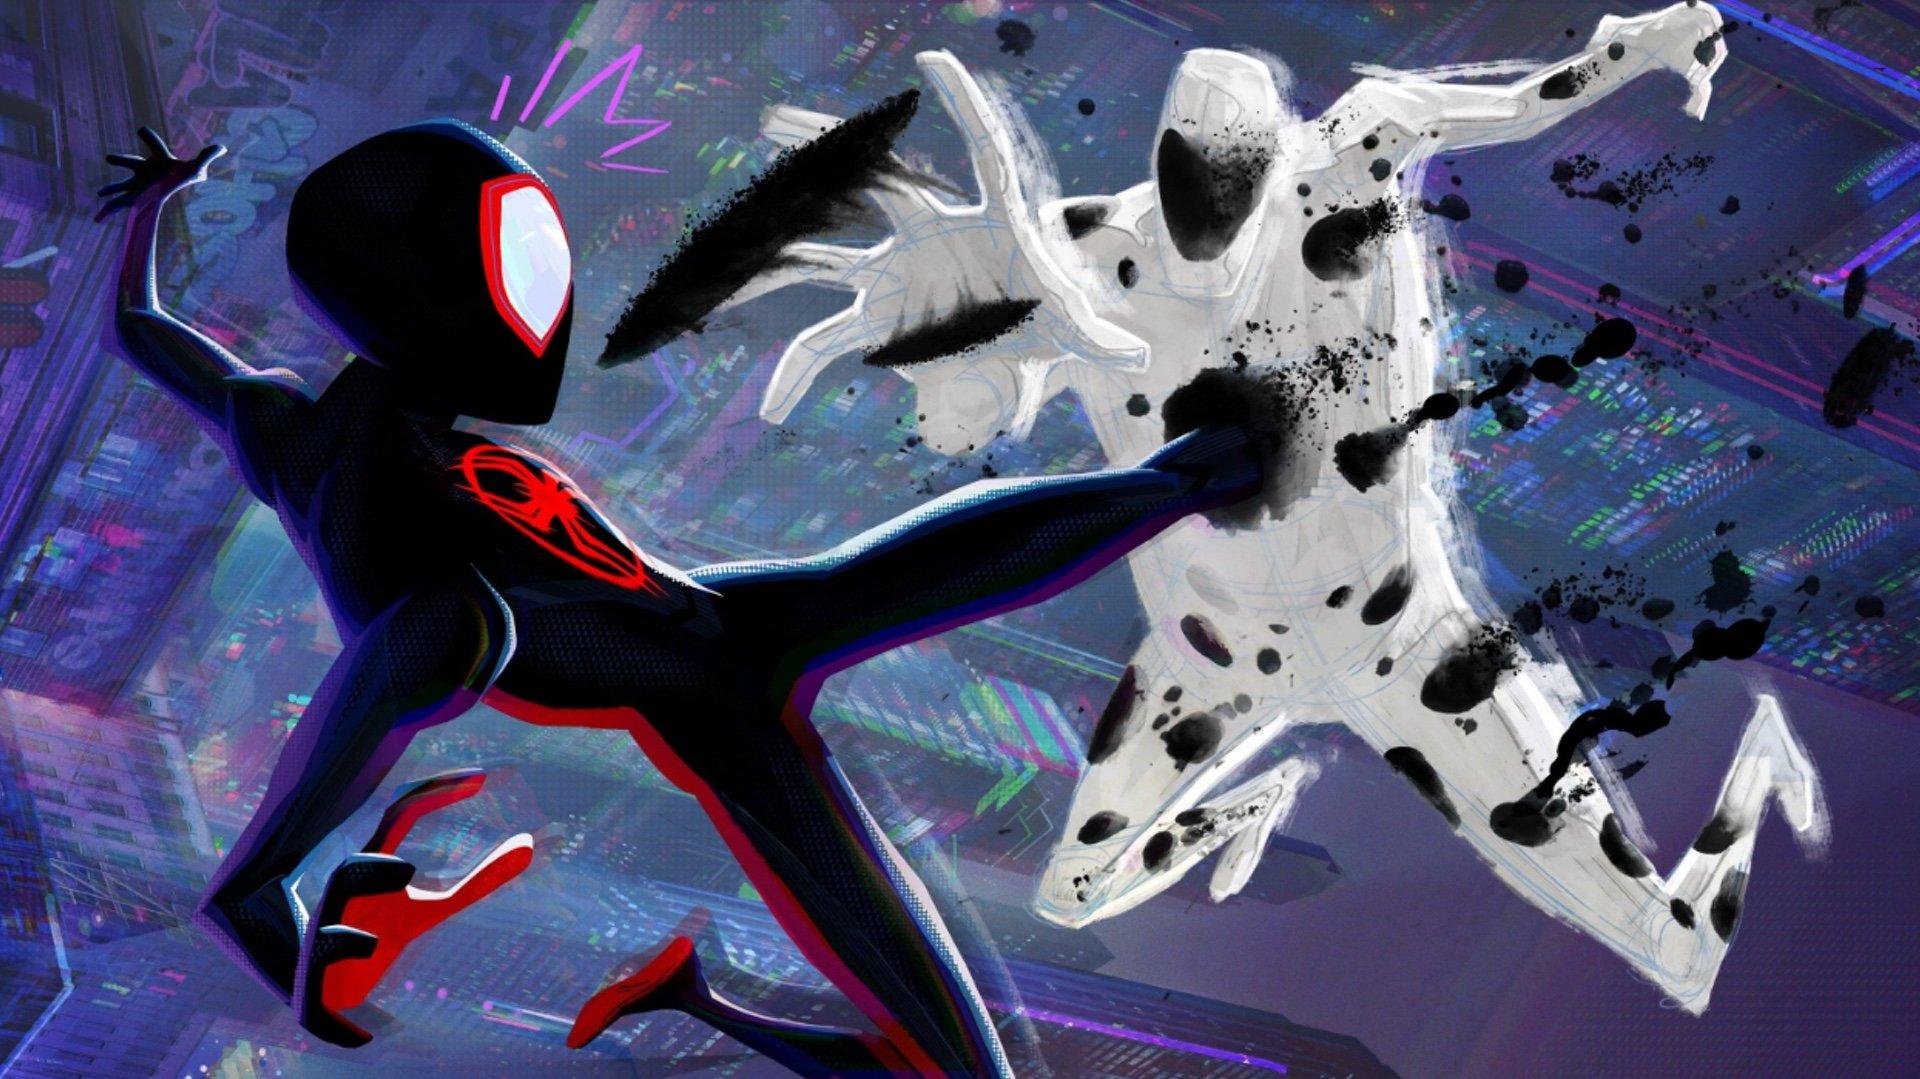 SPIDER MAN ACROSS THE SPIDER VERSE   Poster Art Image Featuring